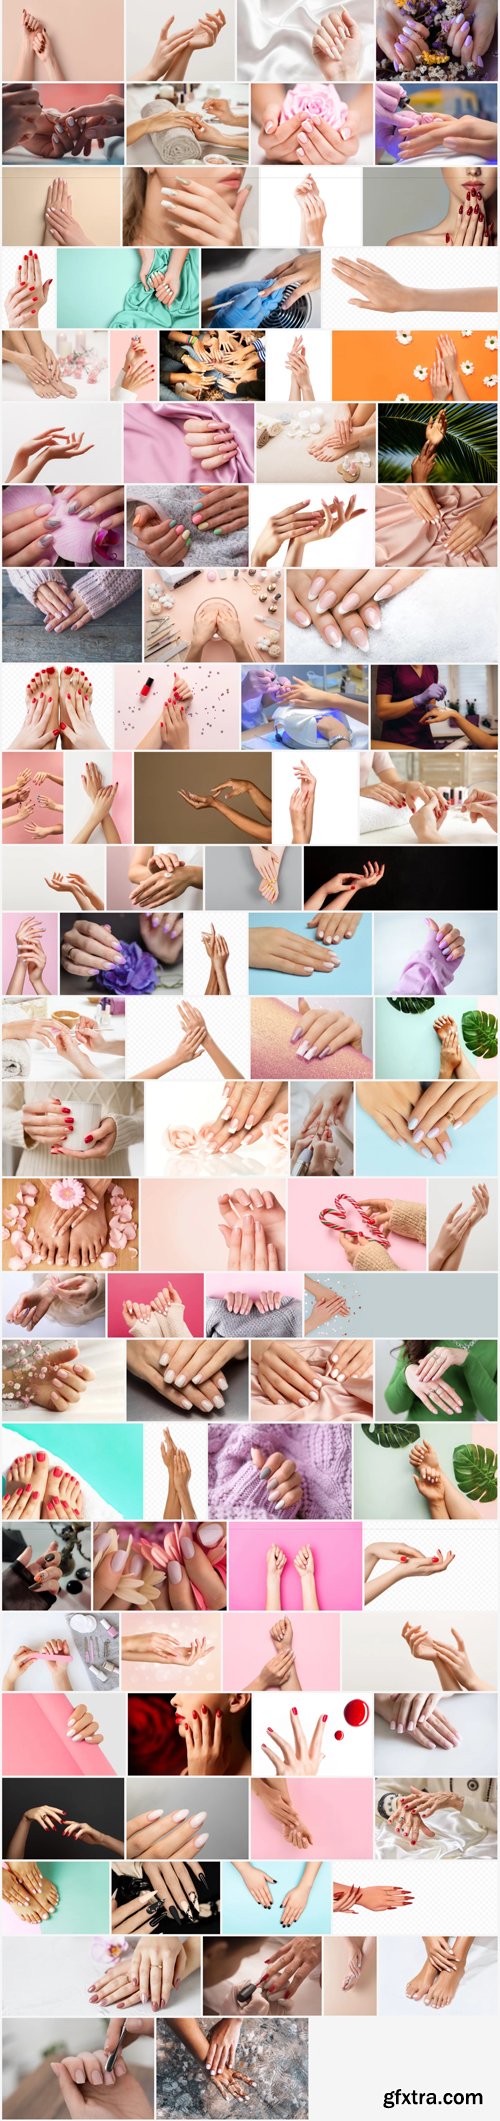 Stock Photo - Manicure and Hands